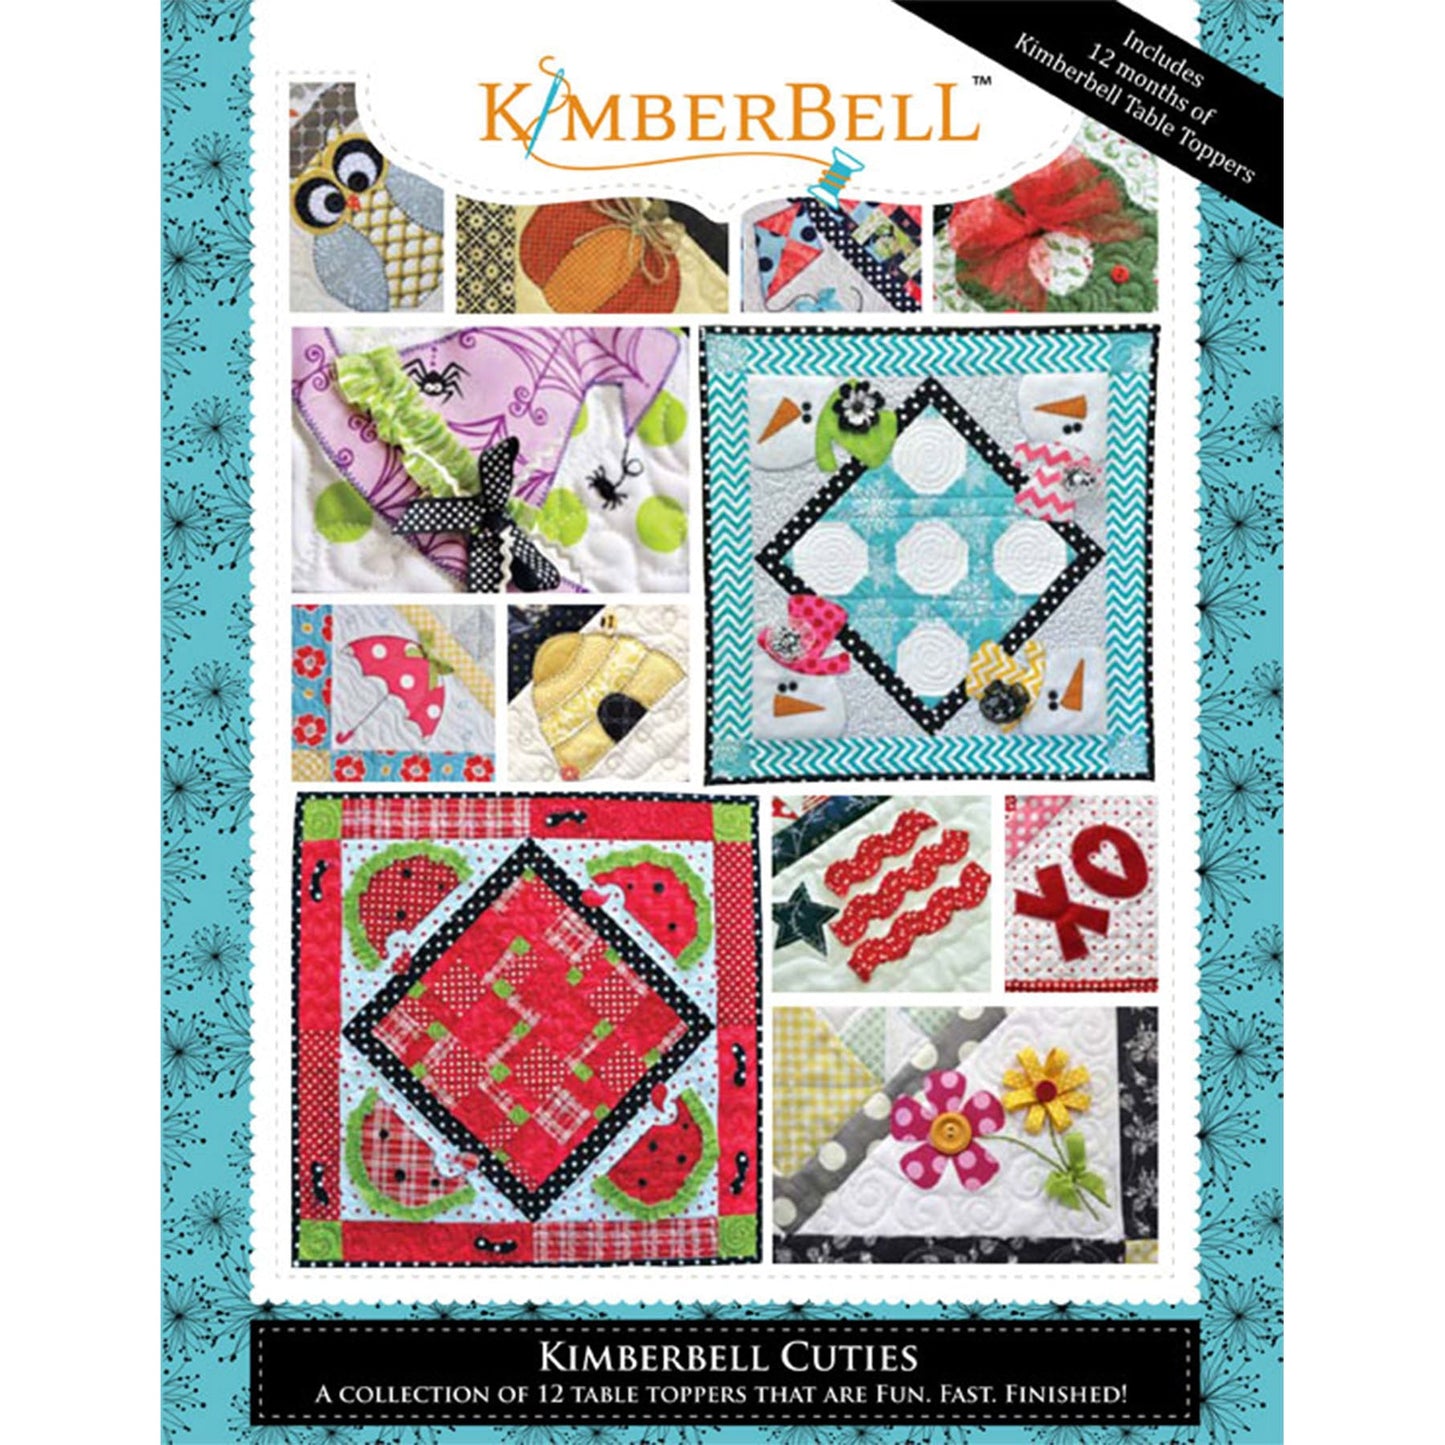 Kimberbell Cuties: 12 Seasonal Table Toppers Pattern Book (KD701) features 12 table topper to use alone or coordinate with Kimberbell's popular bench pillow series. Picture shows the front cover of the book.